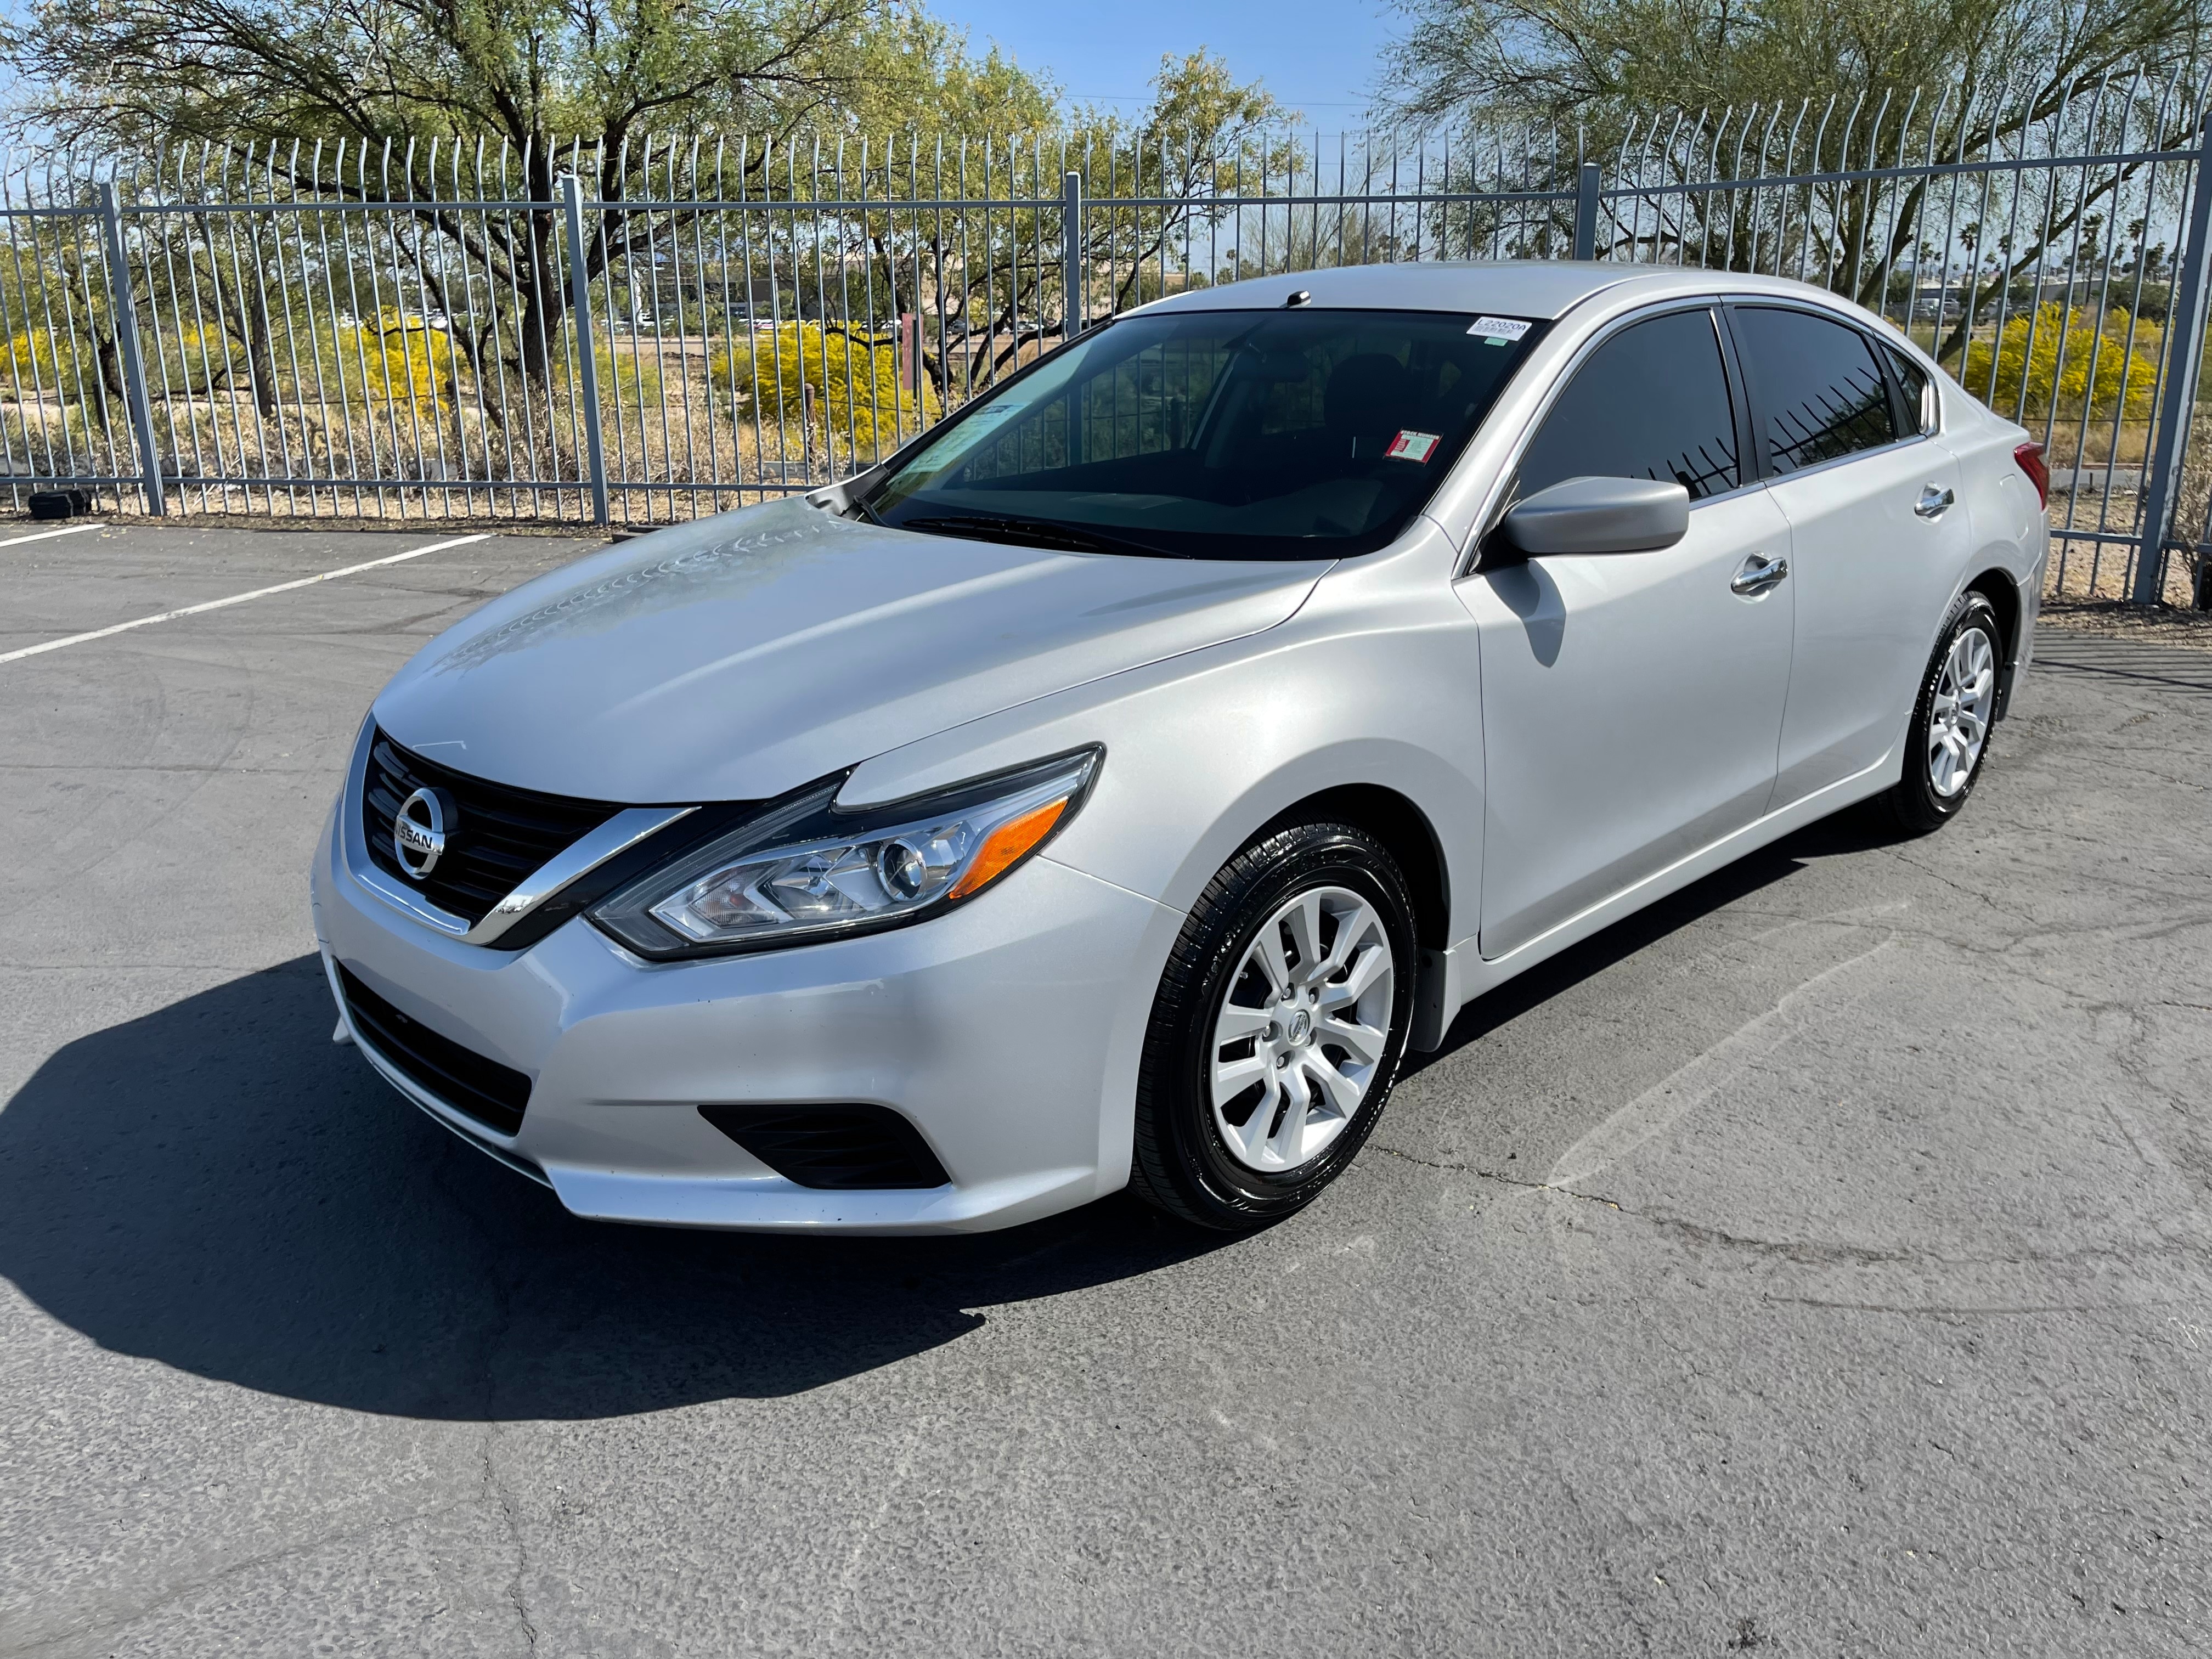 2018 nissan altima for sale in tucson